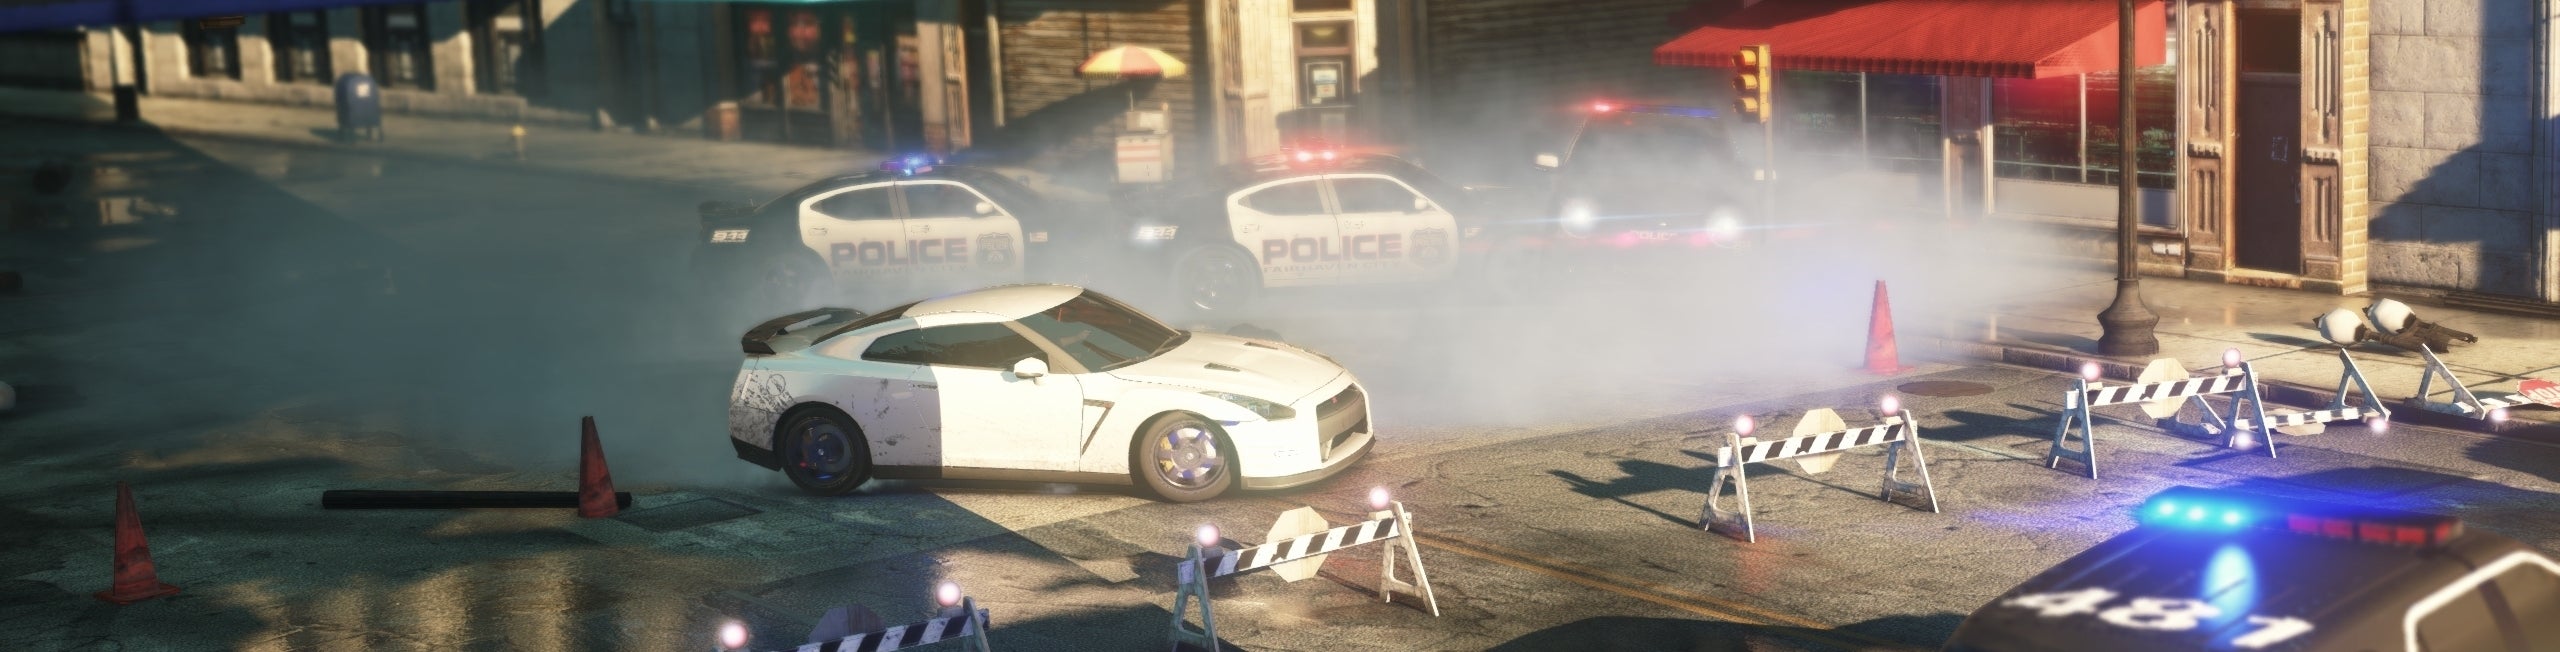 Image for Wii U's Most Wanted: Criterion returns to Nintendo hardware with enhanced Need for Speed